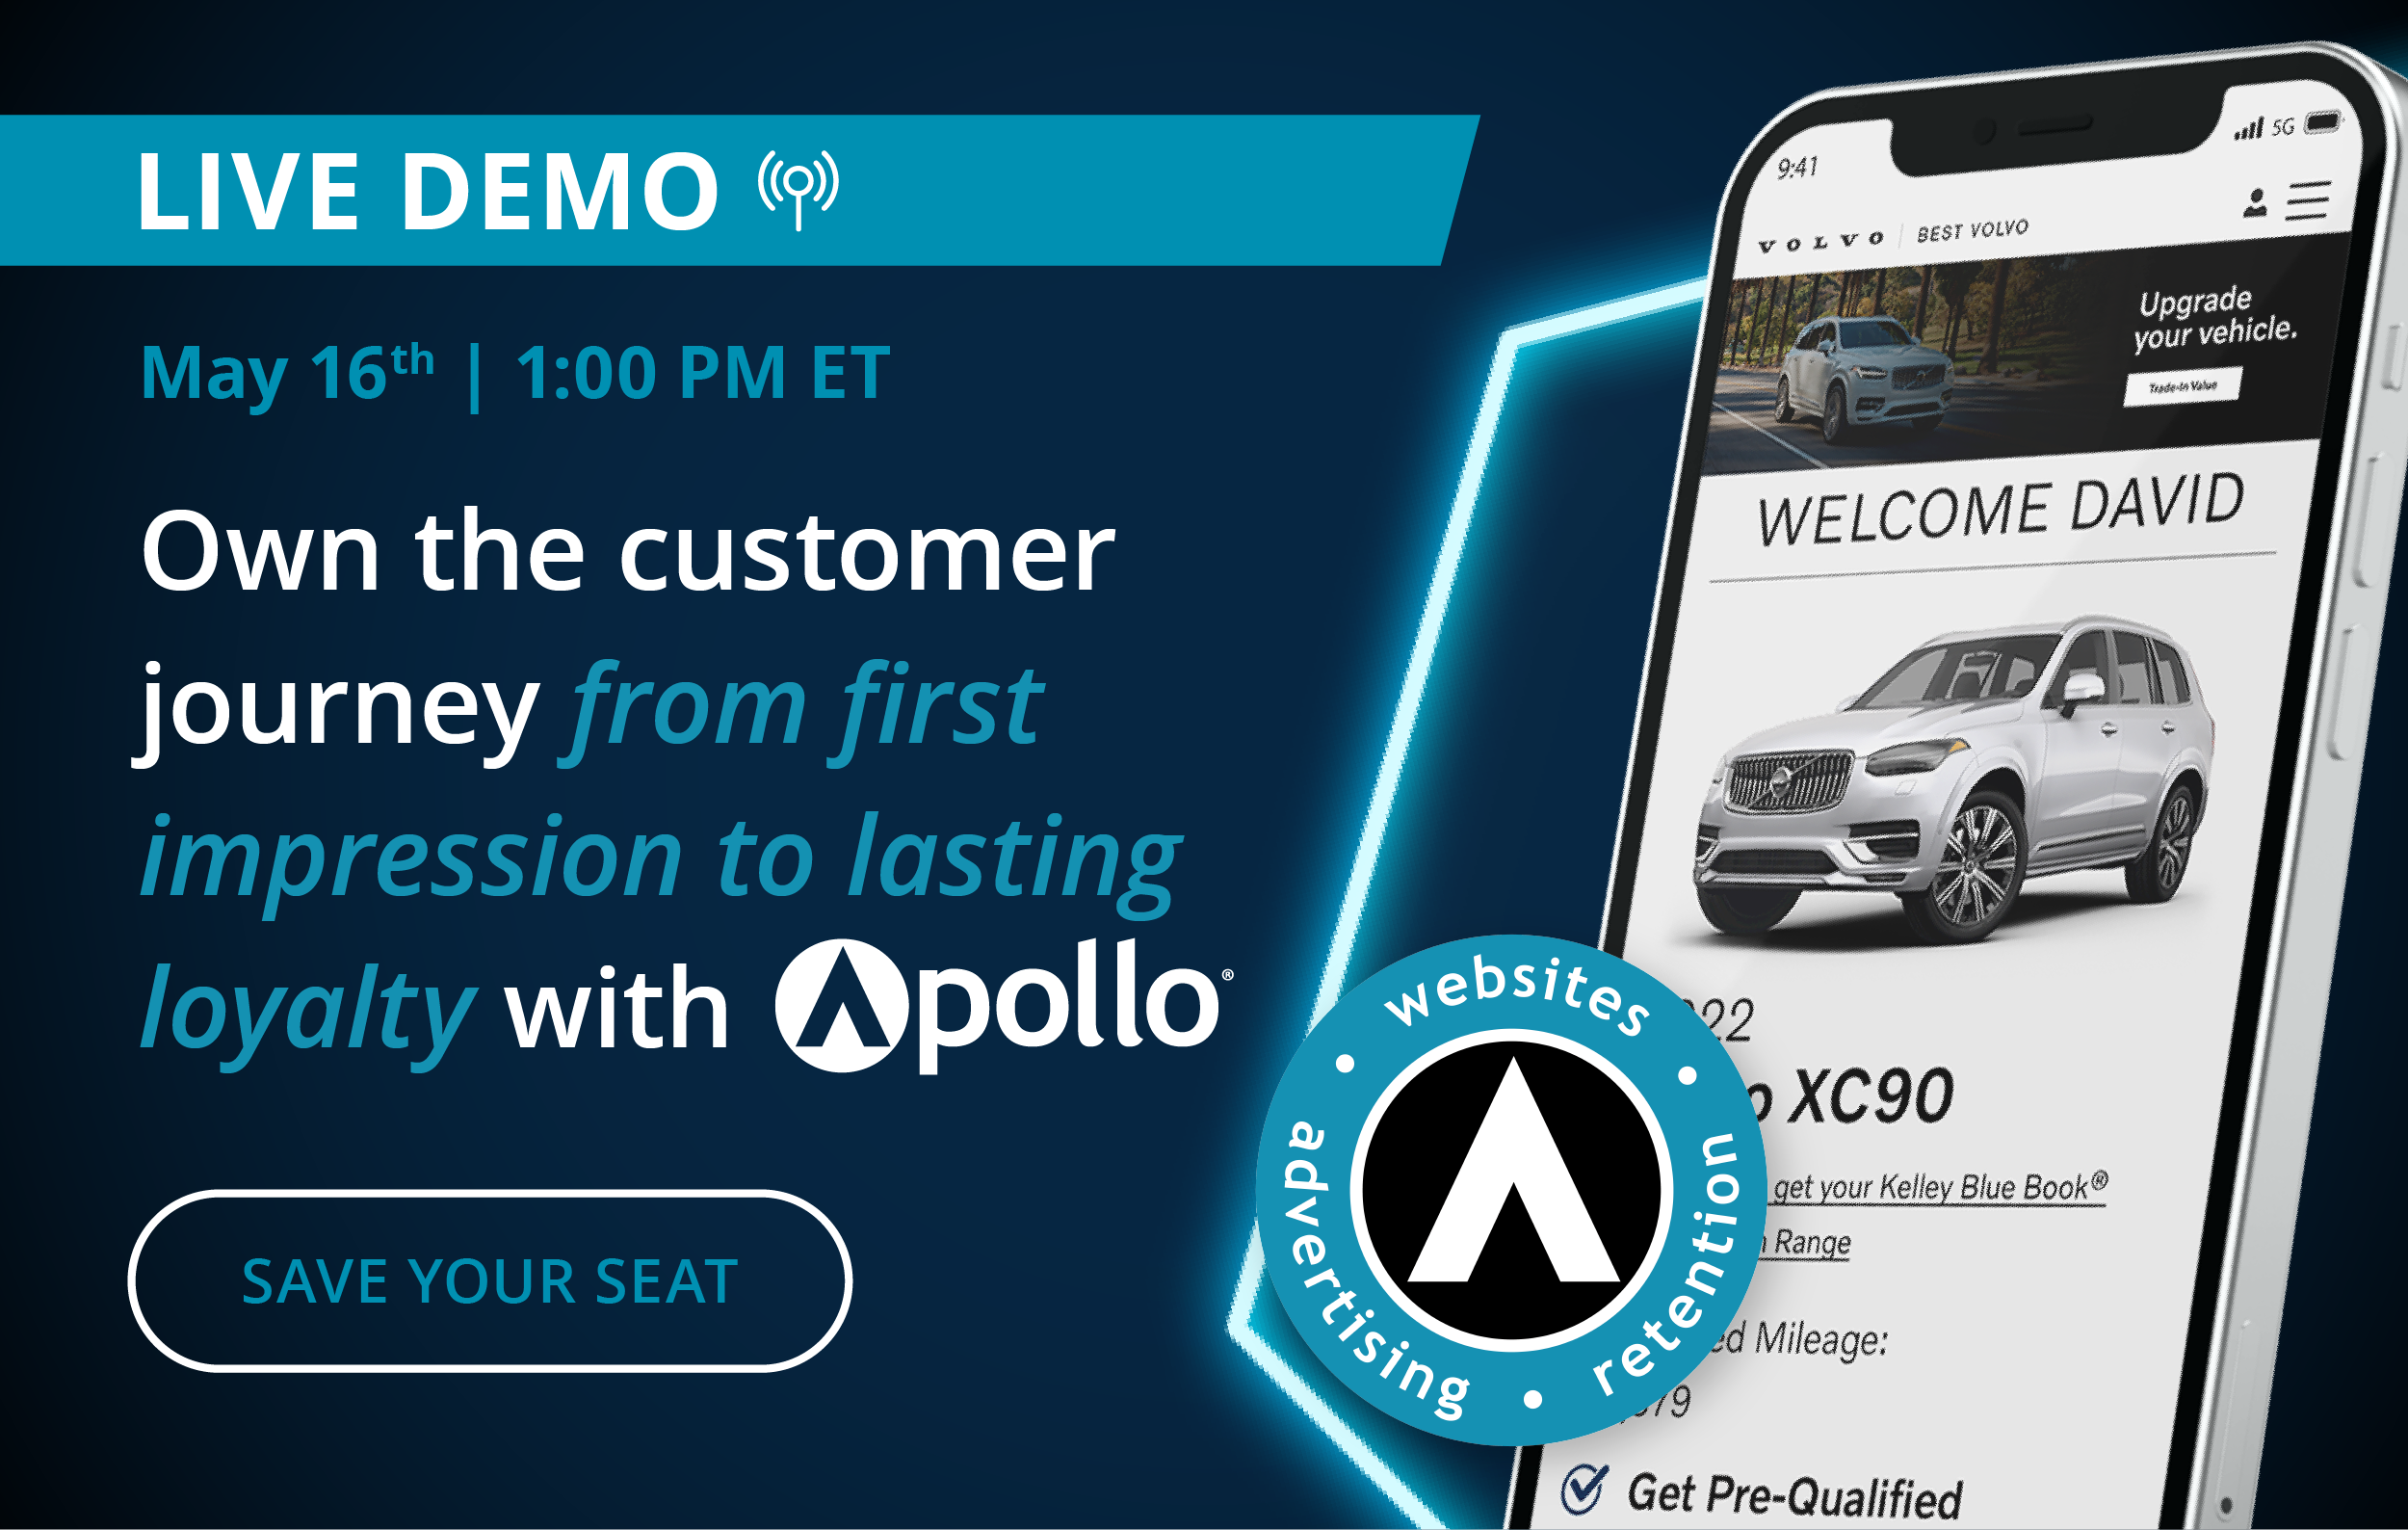 LIVE DEMO May 16th 1:00 PM ET